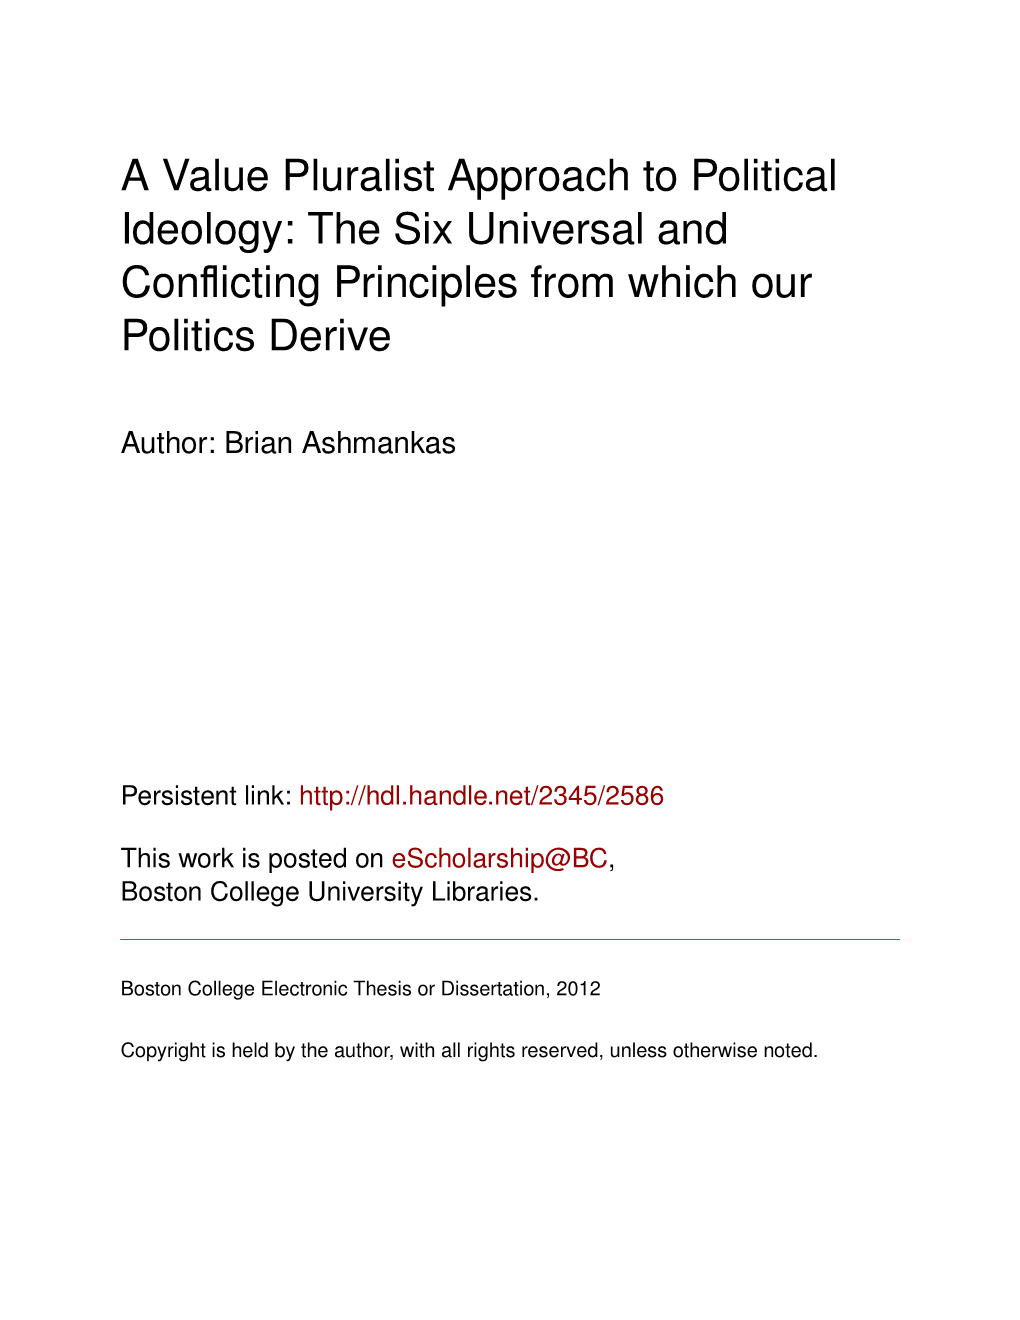 A Value Pluralist Approach to Political Ideology: the Six Universal and Conﬂicting Principles from Which Our Politics Derive